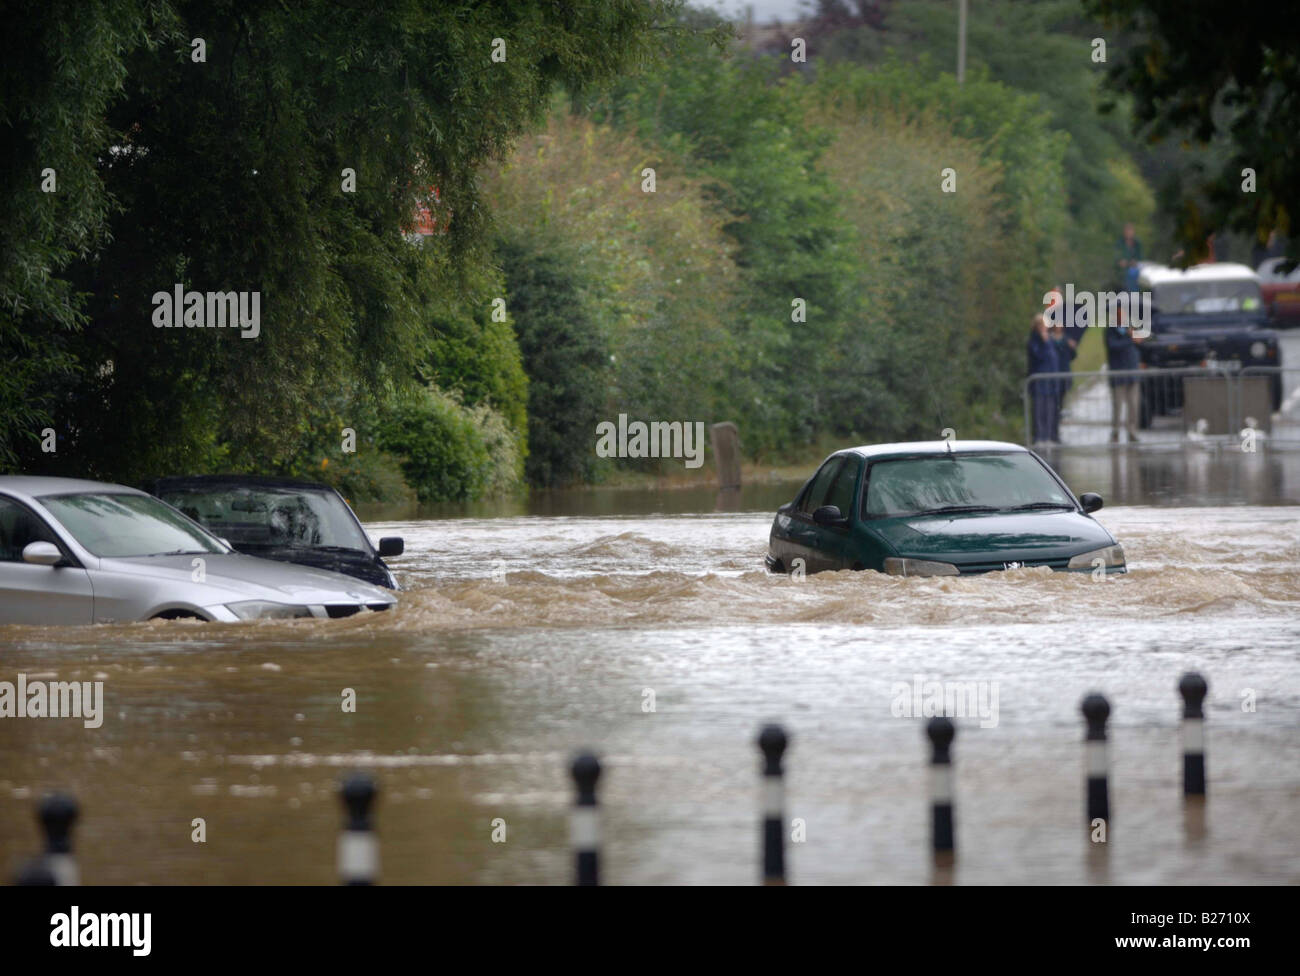 ABANDONED VEHICLES STUCK IN FLOODWATER IN TEWKESBURY DURING THE FLOODS IN GLOUCESTERSHIRE JULY 2007 UK Stock Photo